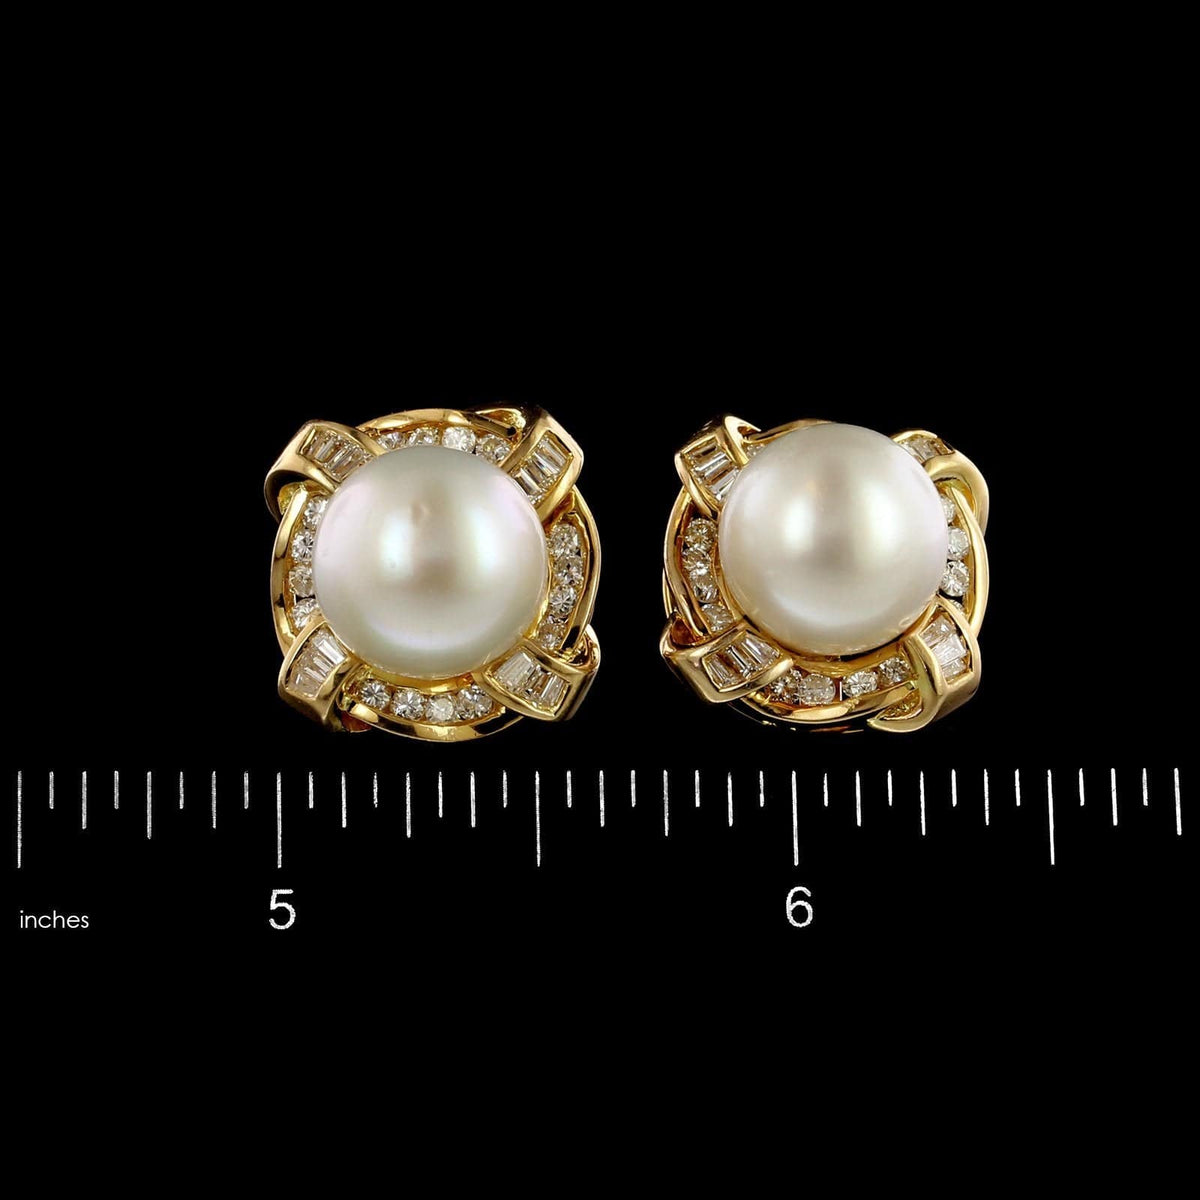 18K Yellow Gold Estate Cultured South Sea Pearl and Diamond Earrings